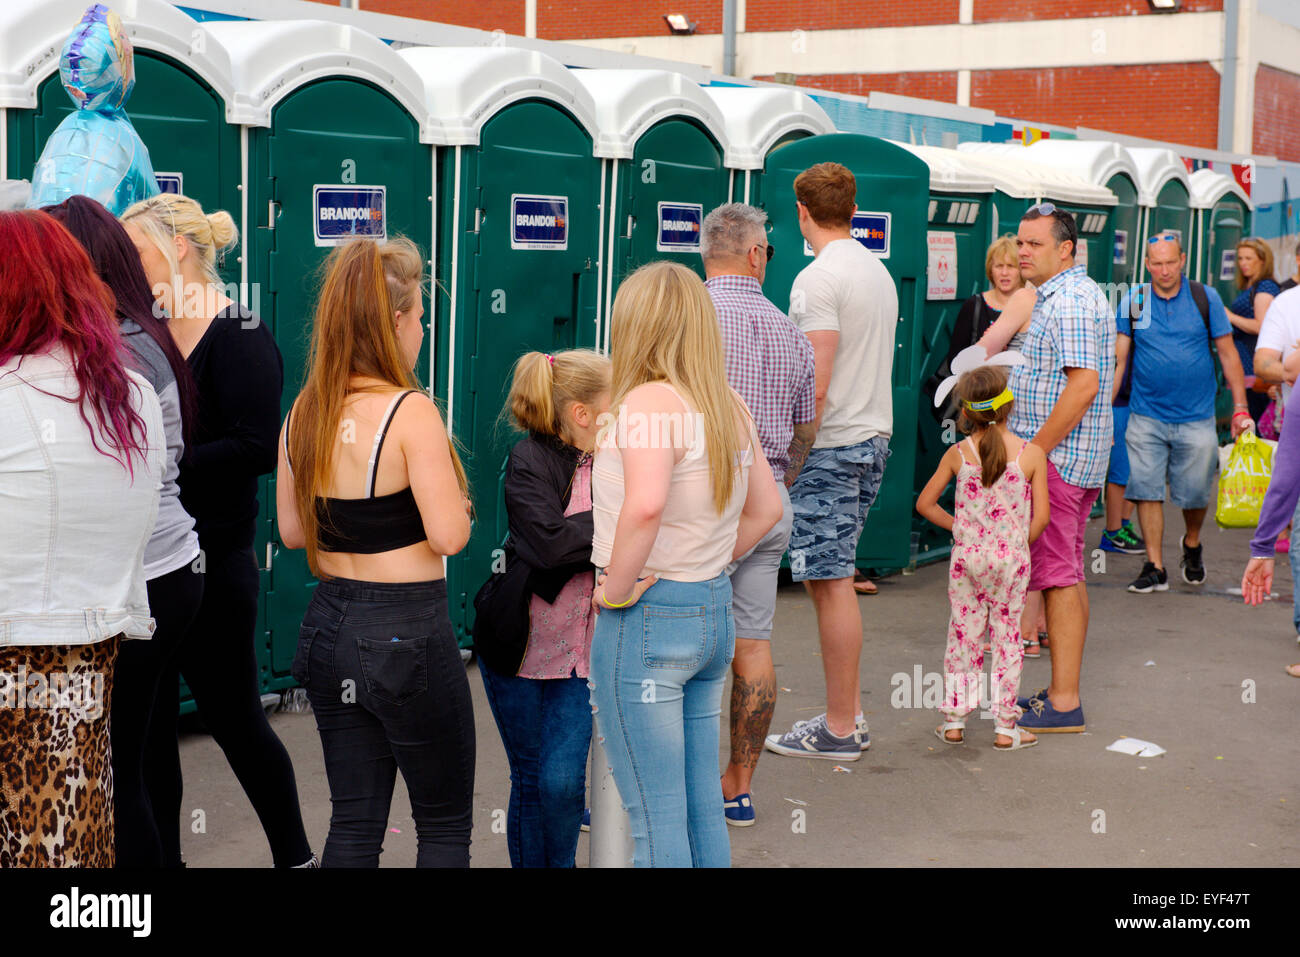 Queue at portable toilets during festival Stock Photo